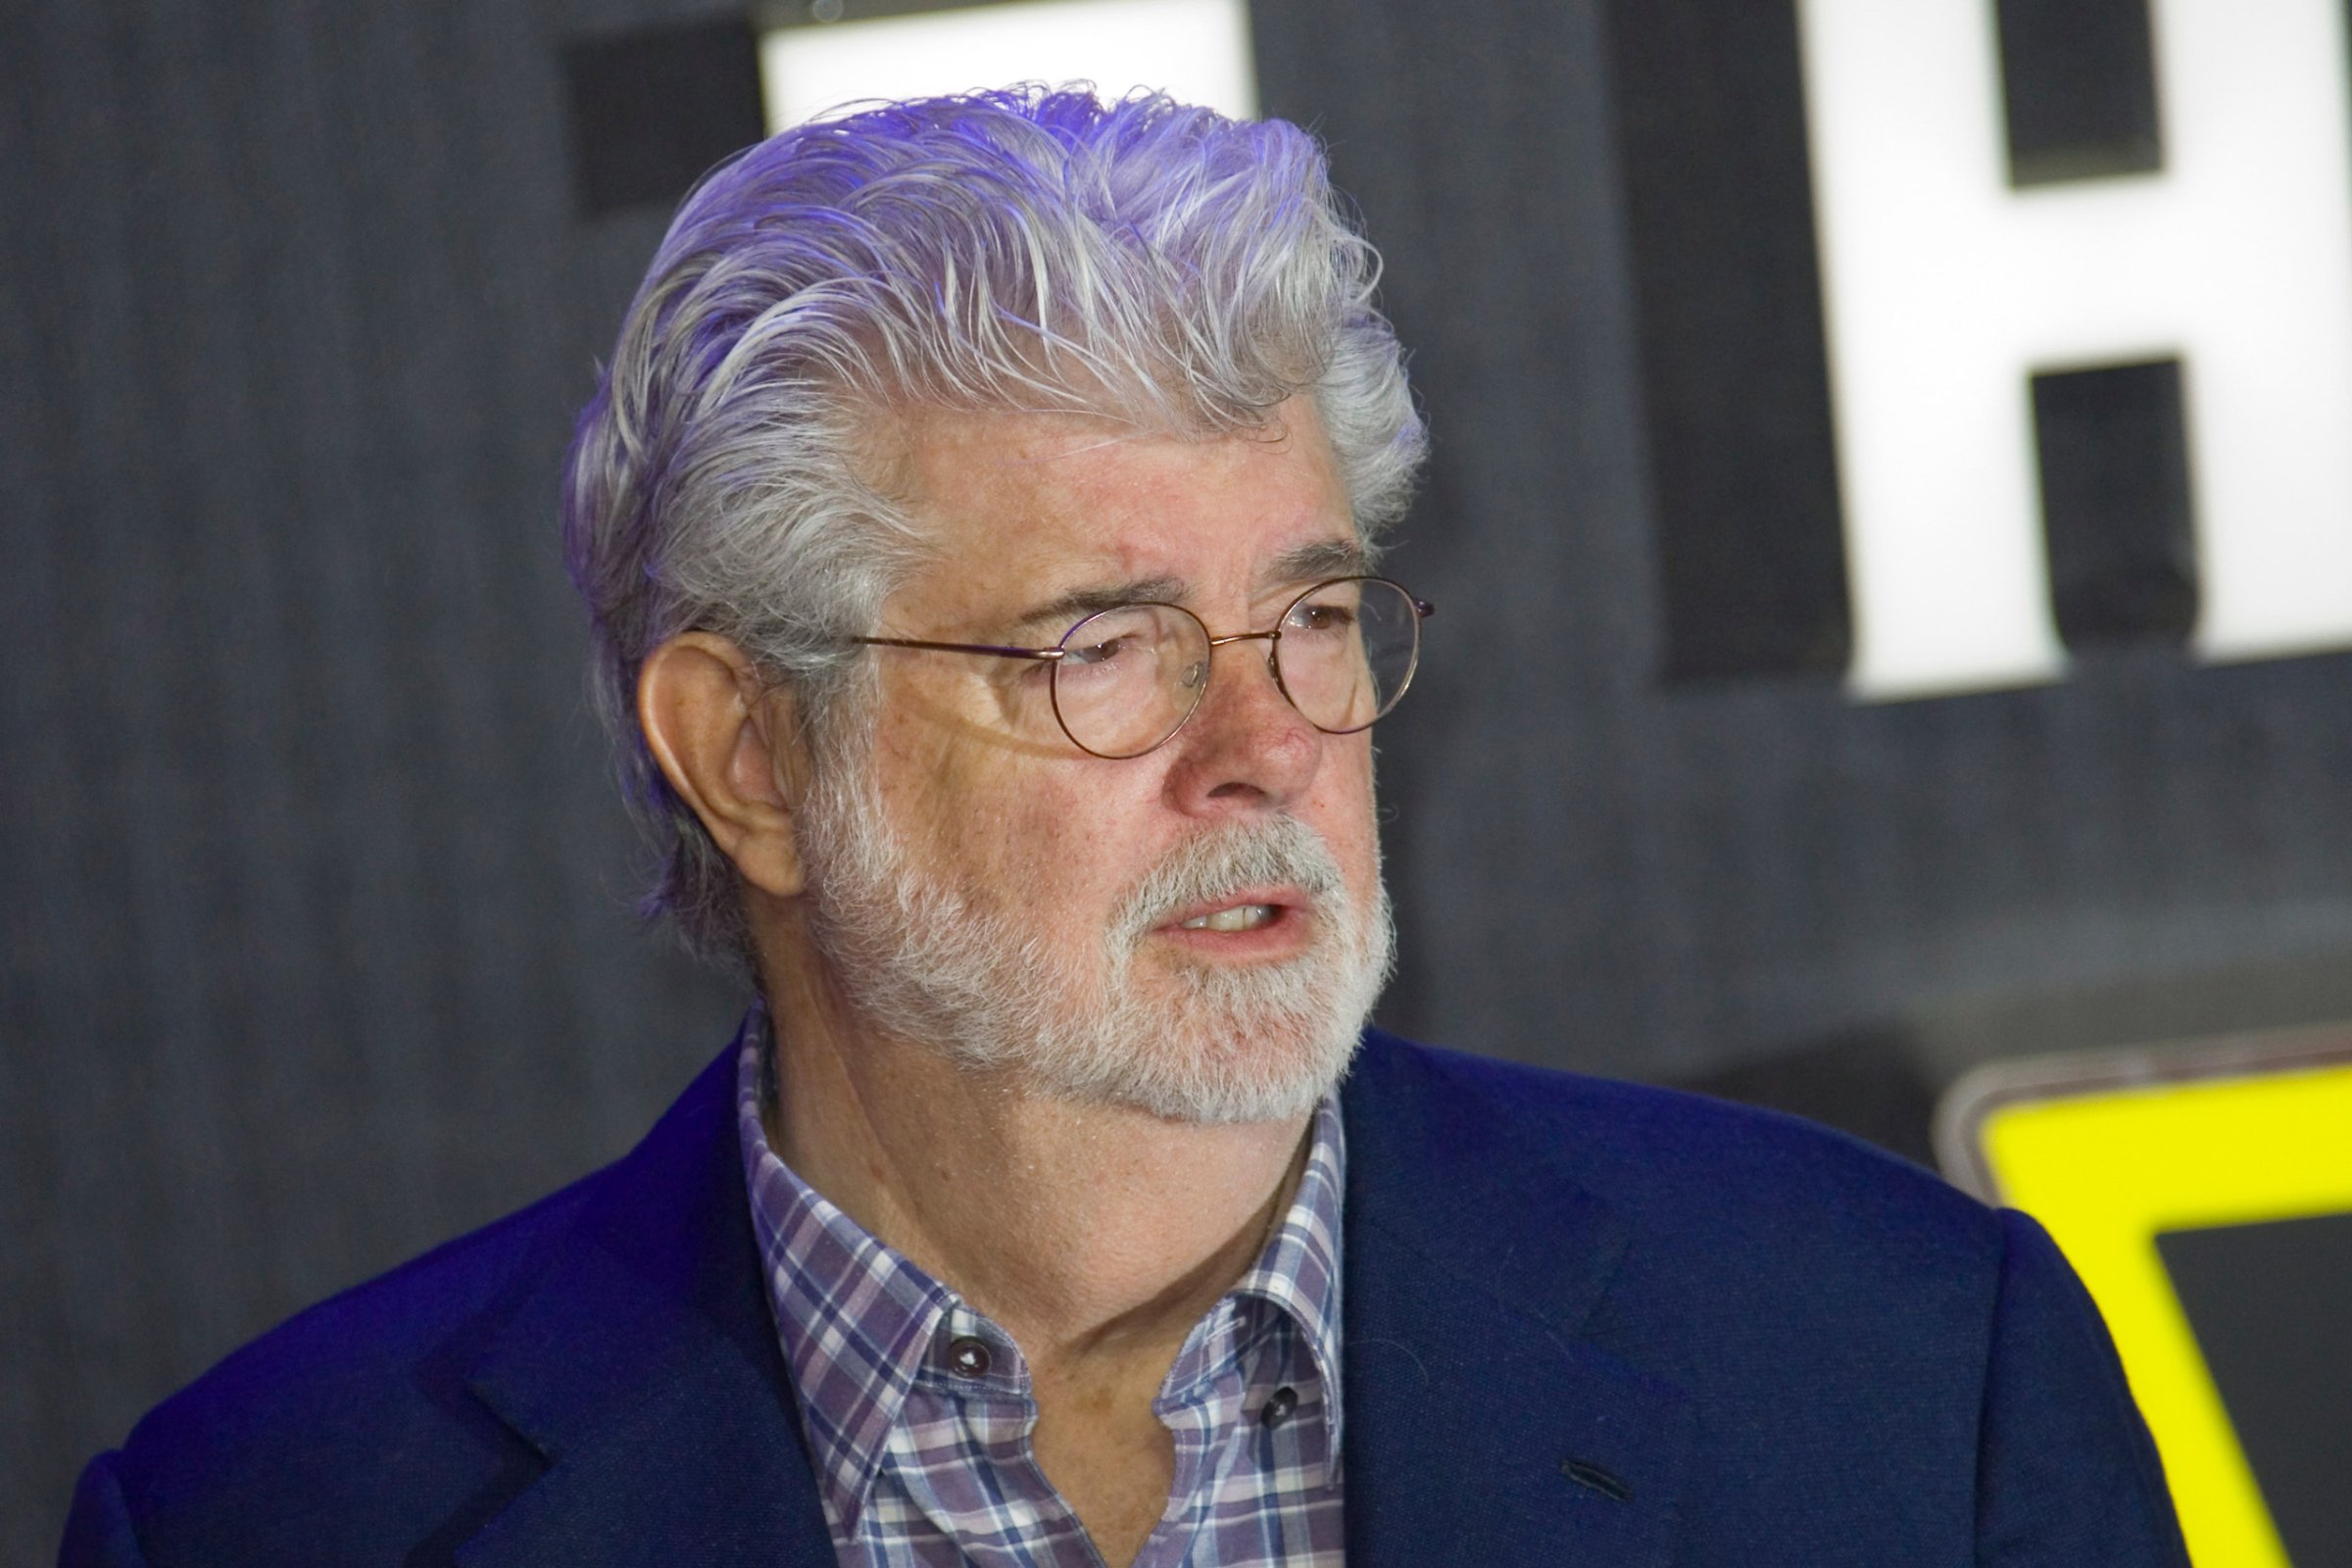 George Lucas attending the Star Wars: The Force Awakens European Premiere held in Leicester Square, London, UK, Wednesday December 16, 2015. Photo by Bakounine/Sipa USA